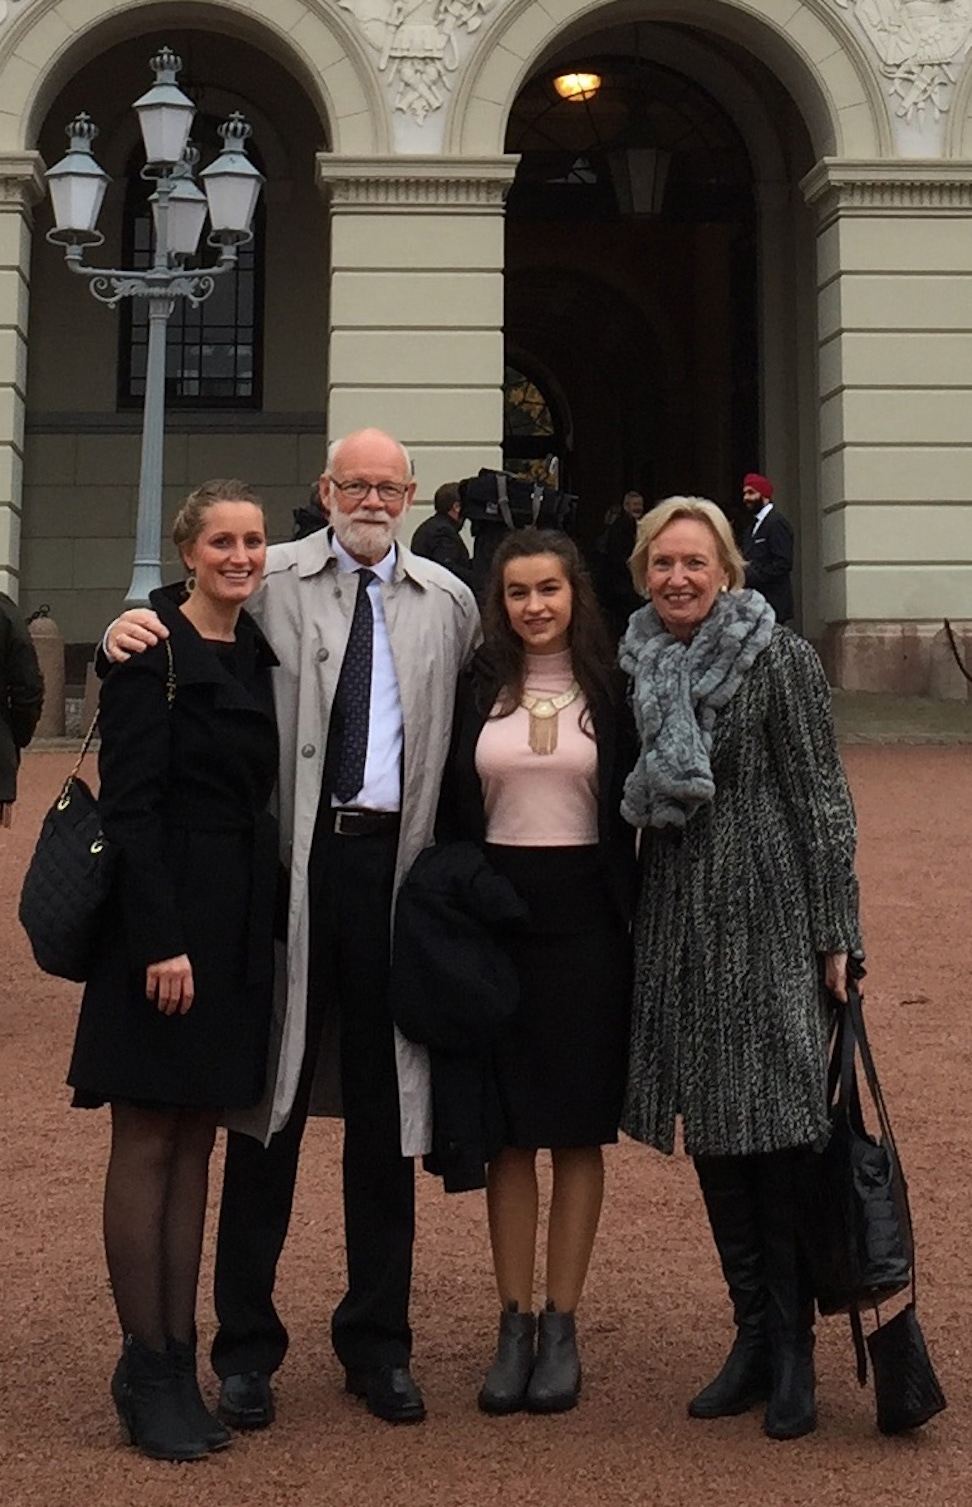 Representatives from the Baha'i community who attended an event hosted by the King and Queen of Norway to promote greater inter-ethnic and inter-religious dialogue and understanding